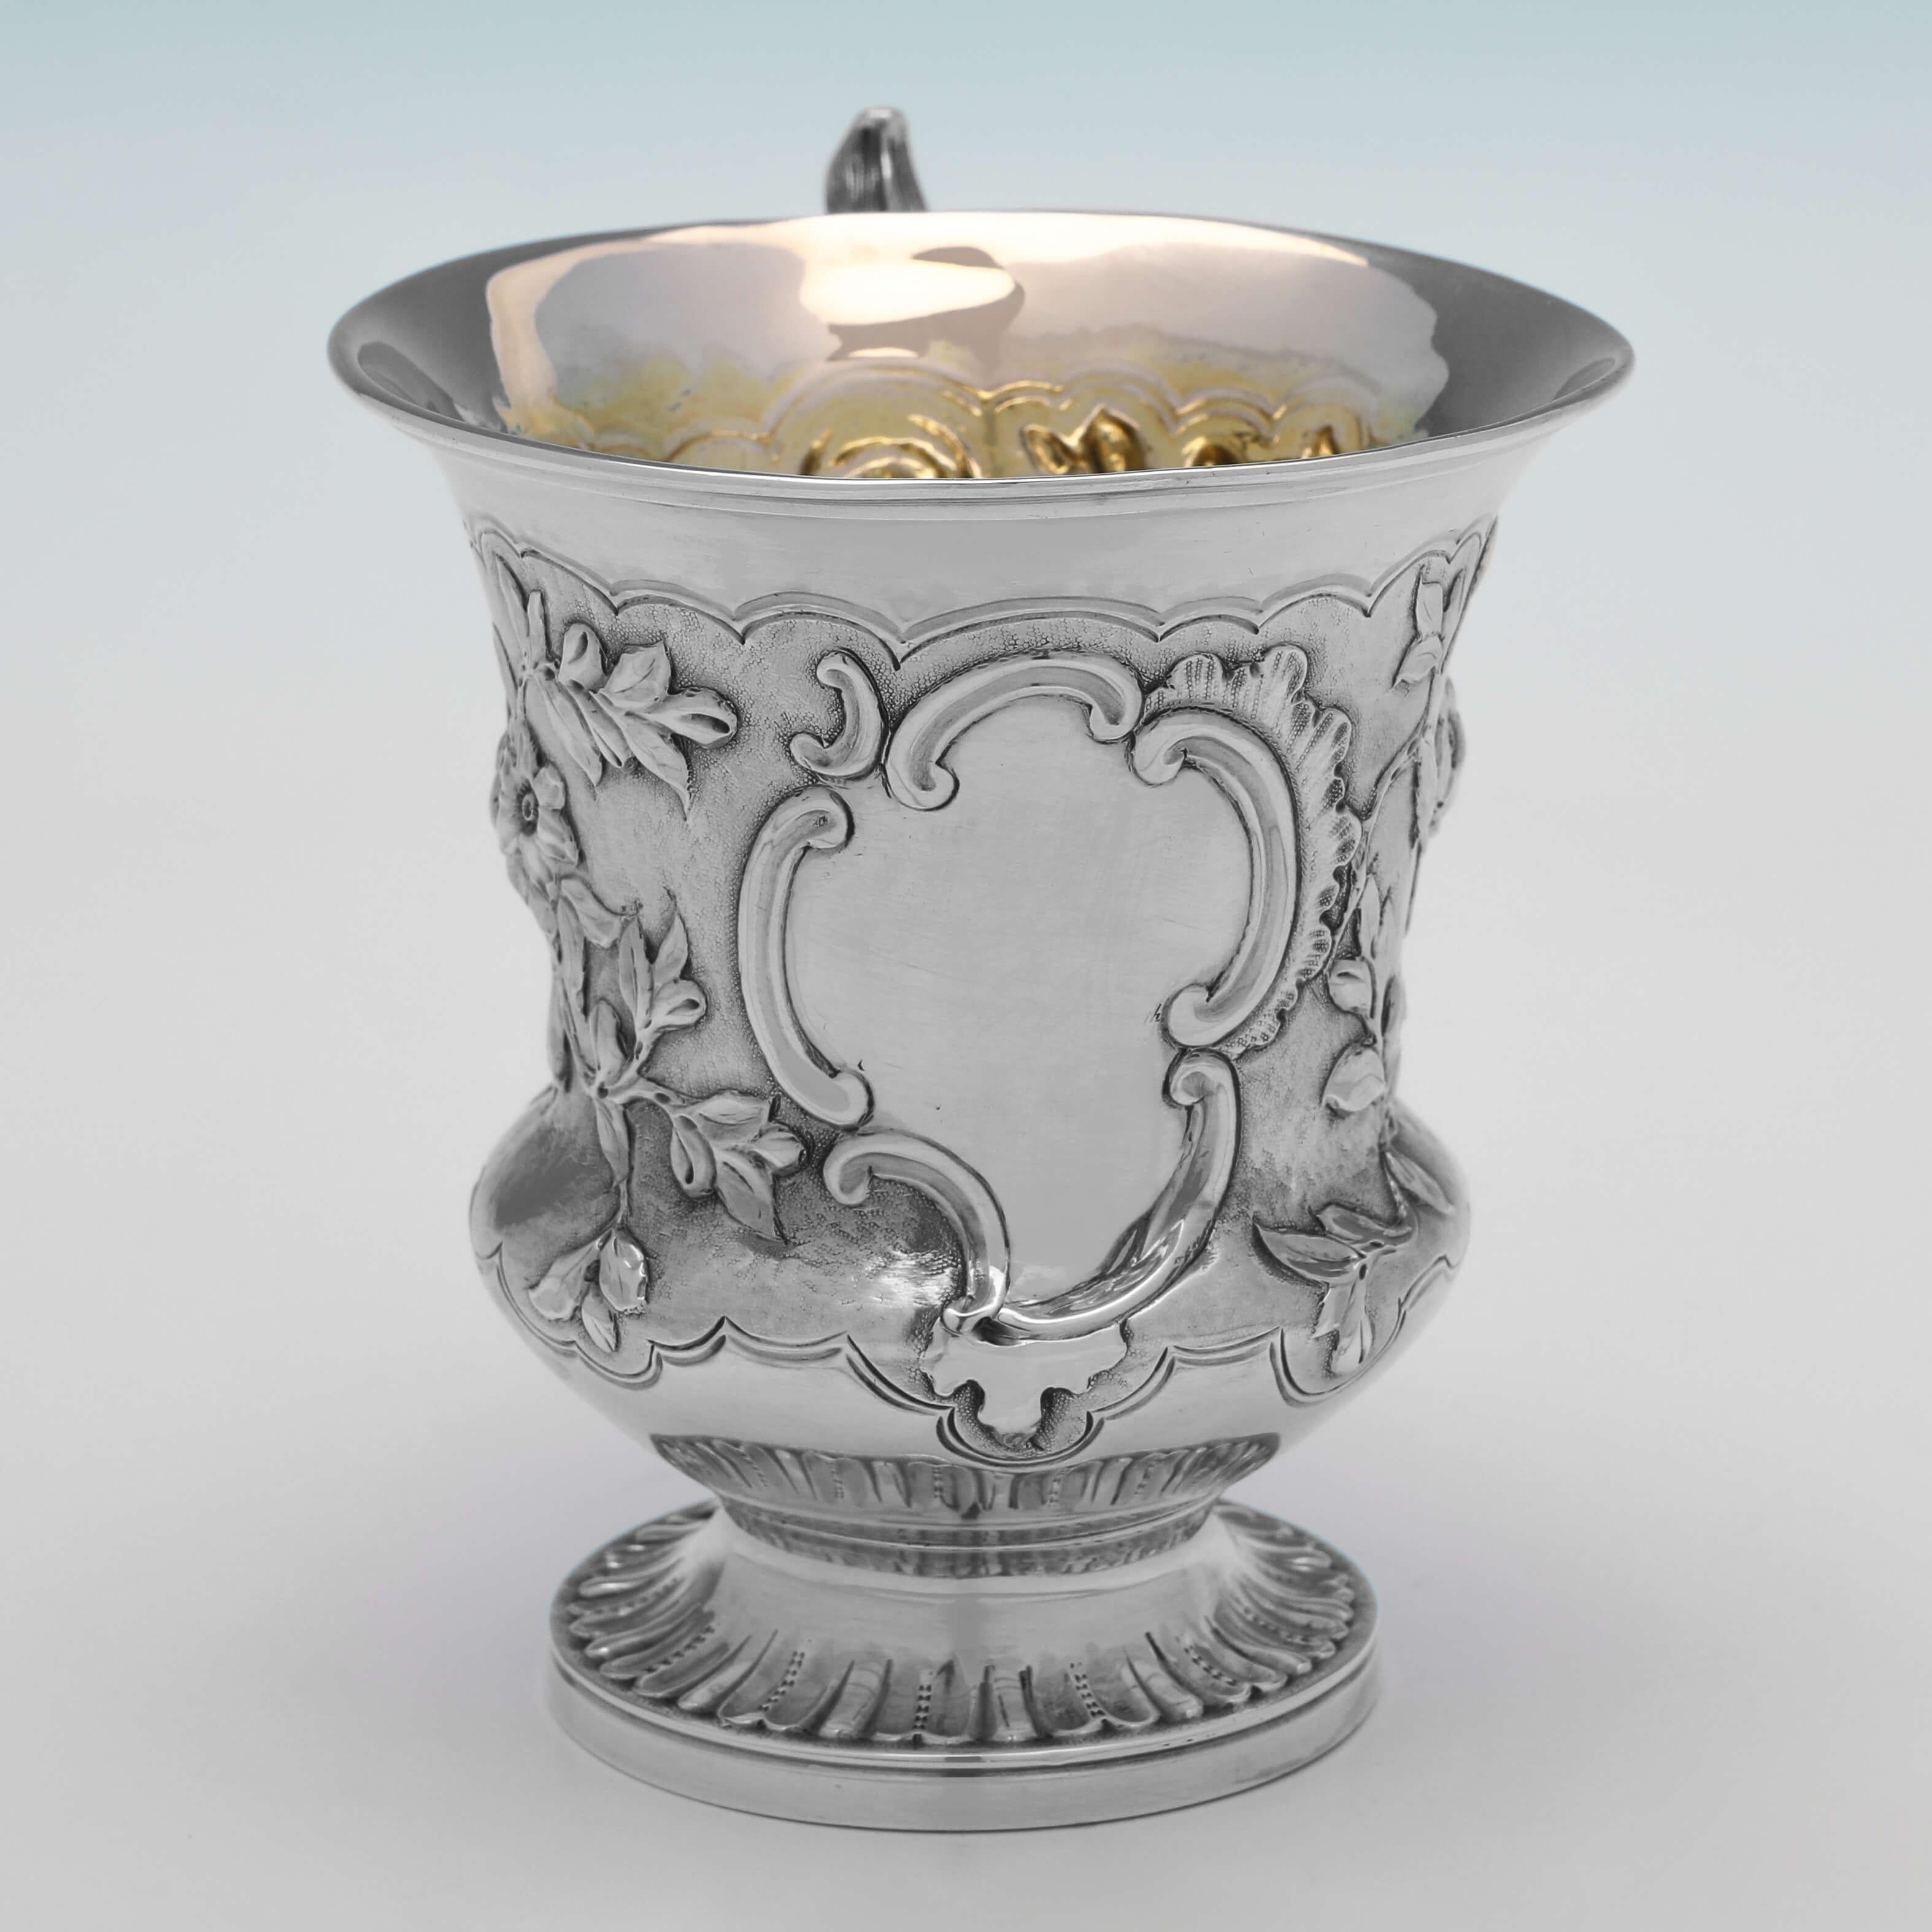 Hallmarked in London in 1840 by J. C. Edington, this attractive, Victorian, Antique Sterling Silver Christening Mug, features wonderful chased floral decoration to the body, an ornate handle, and a gilt interior. 

The christening mug measures